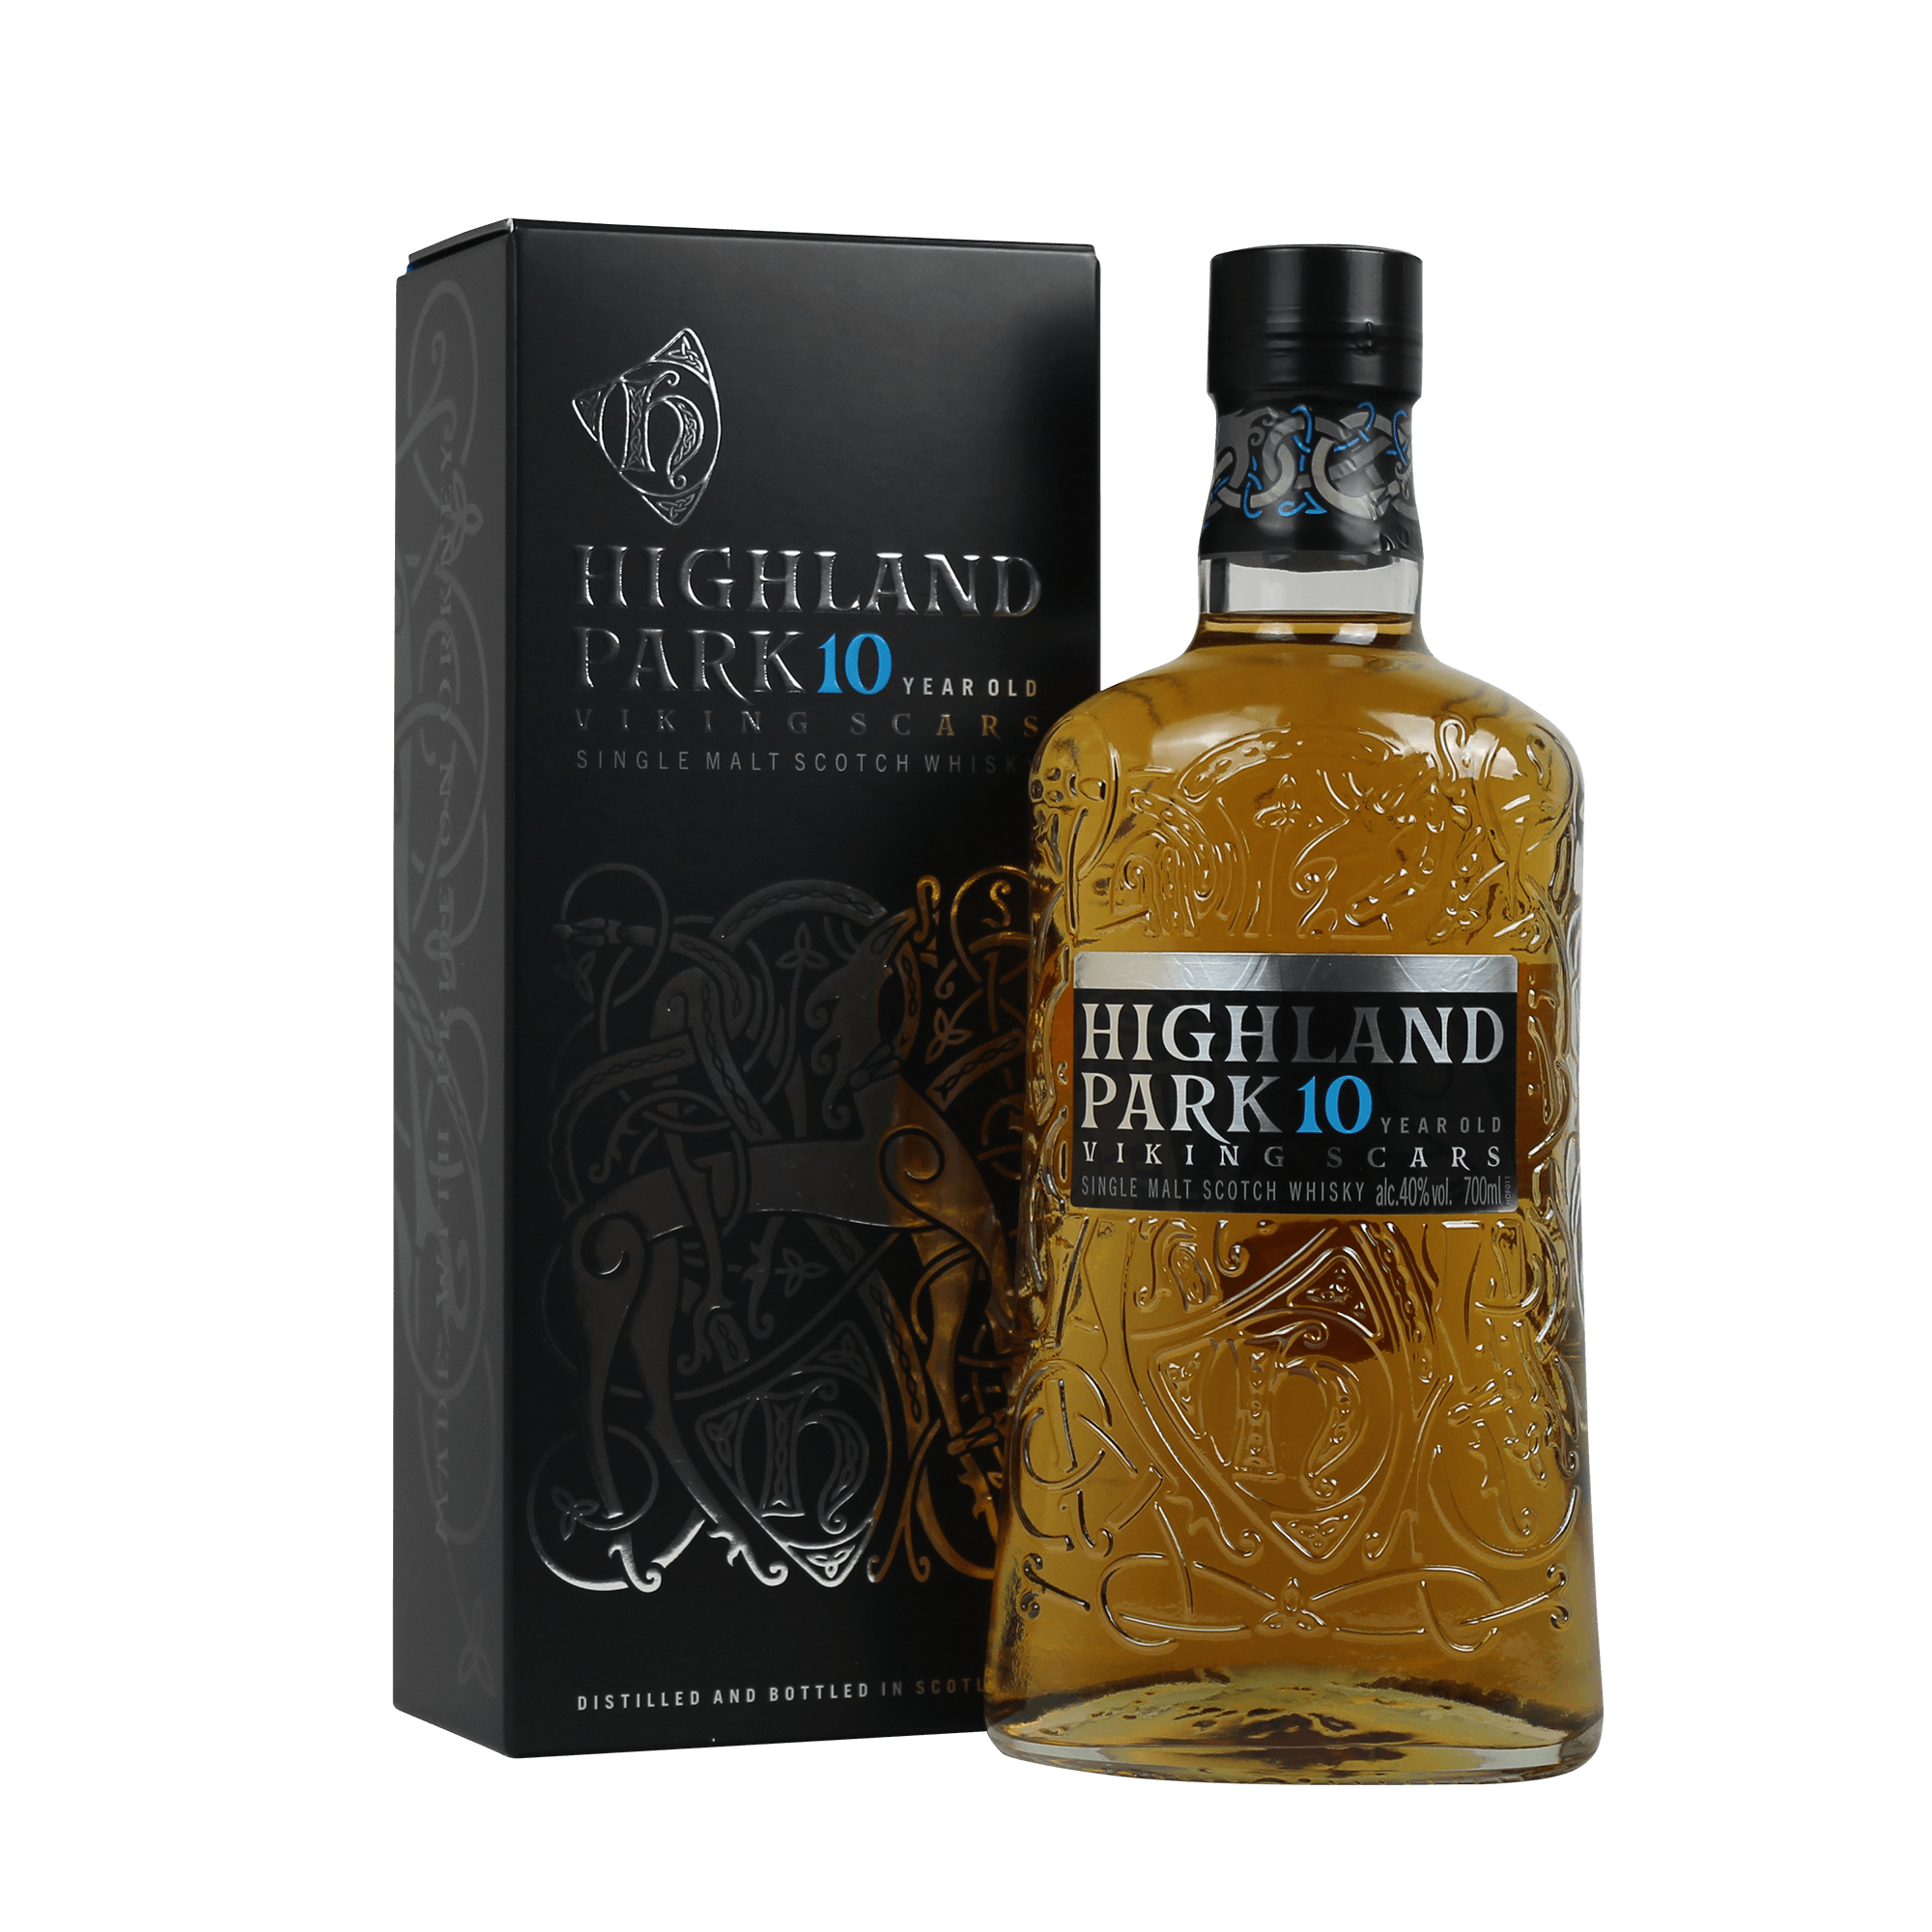 Highland Park 10 Years Old VIKING SCARS 40% Vol. 0,7l in Giftbox